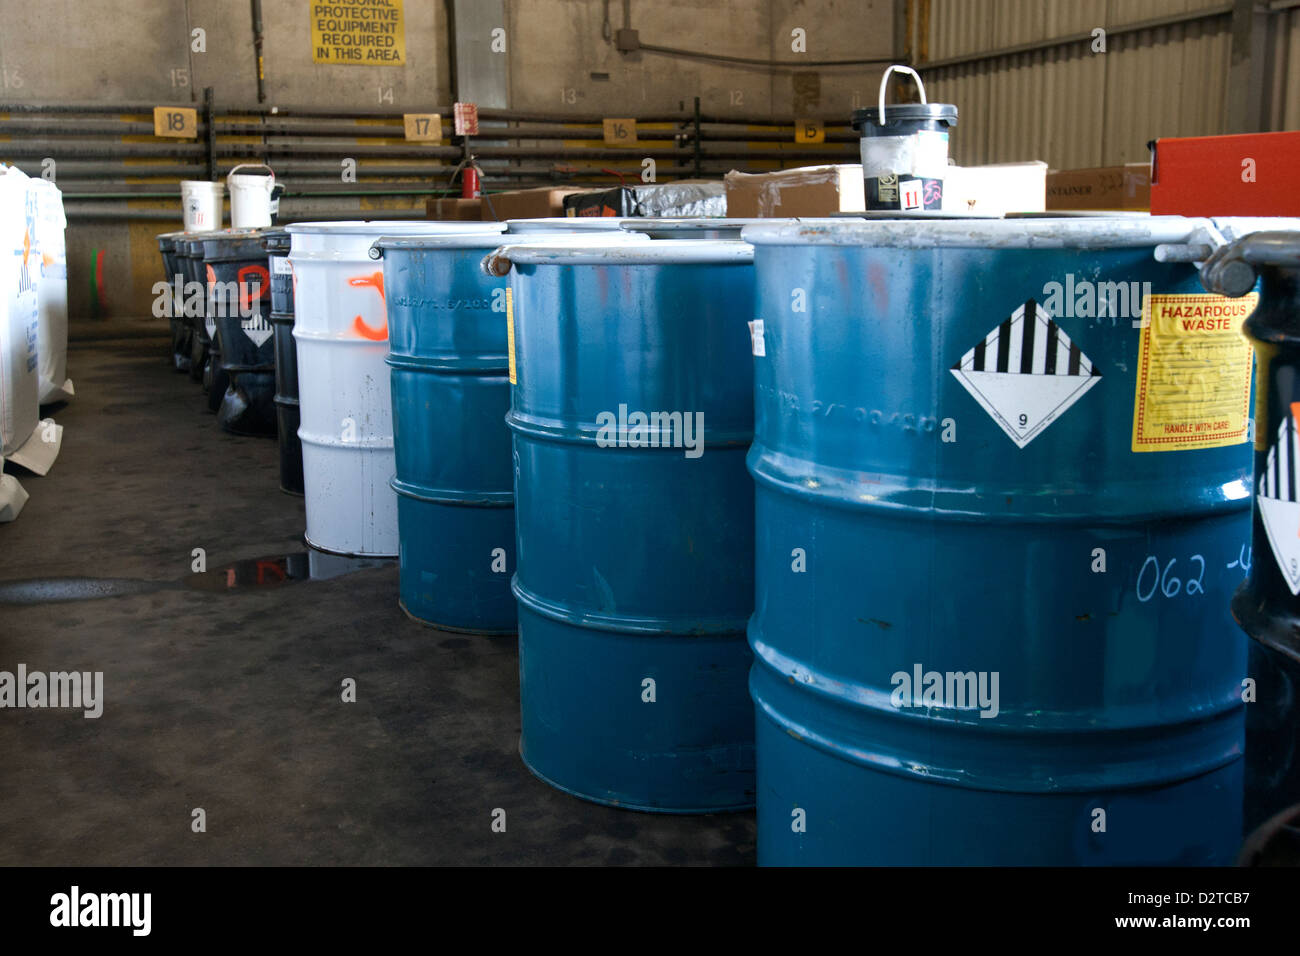 Industrial barrels holding toxic waste Stock Photo